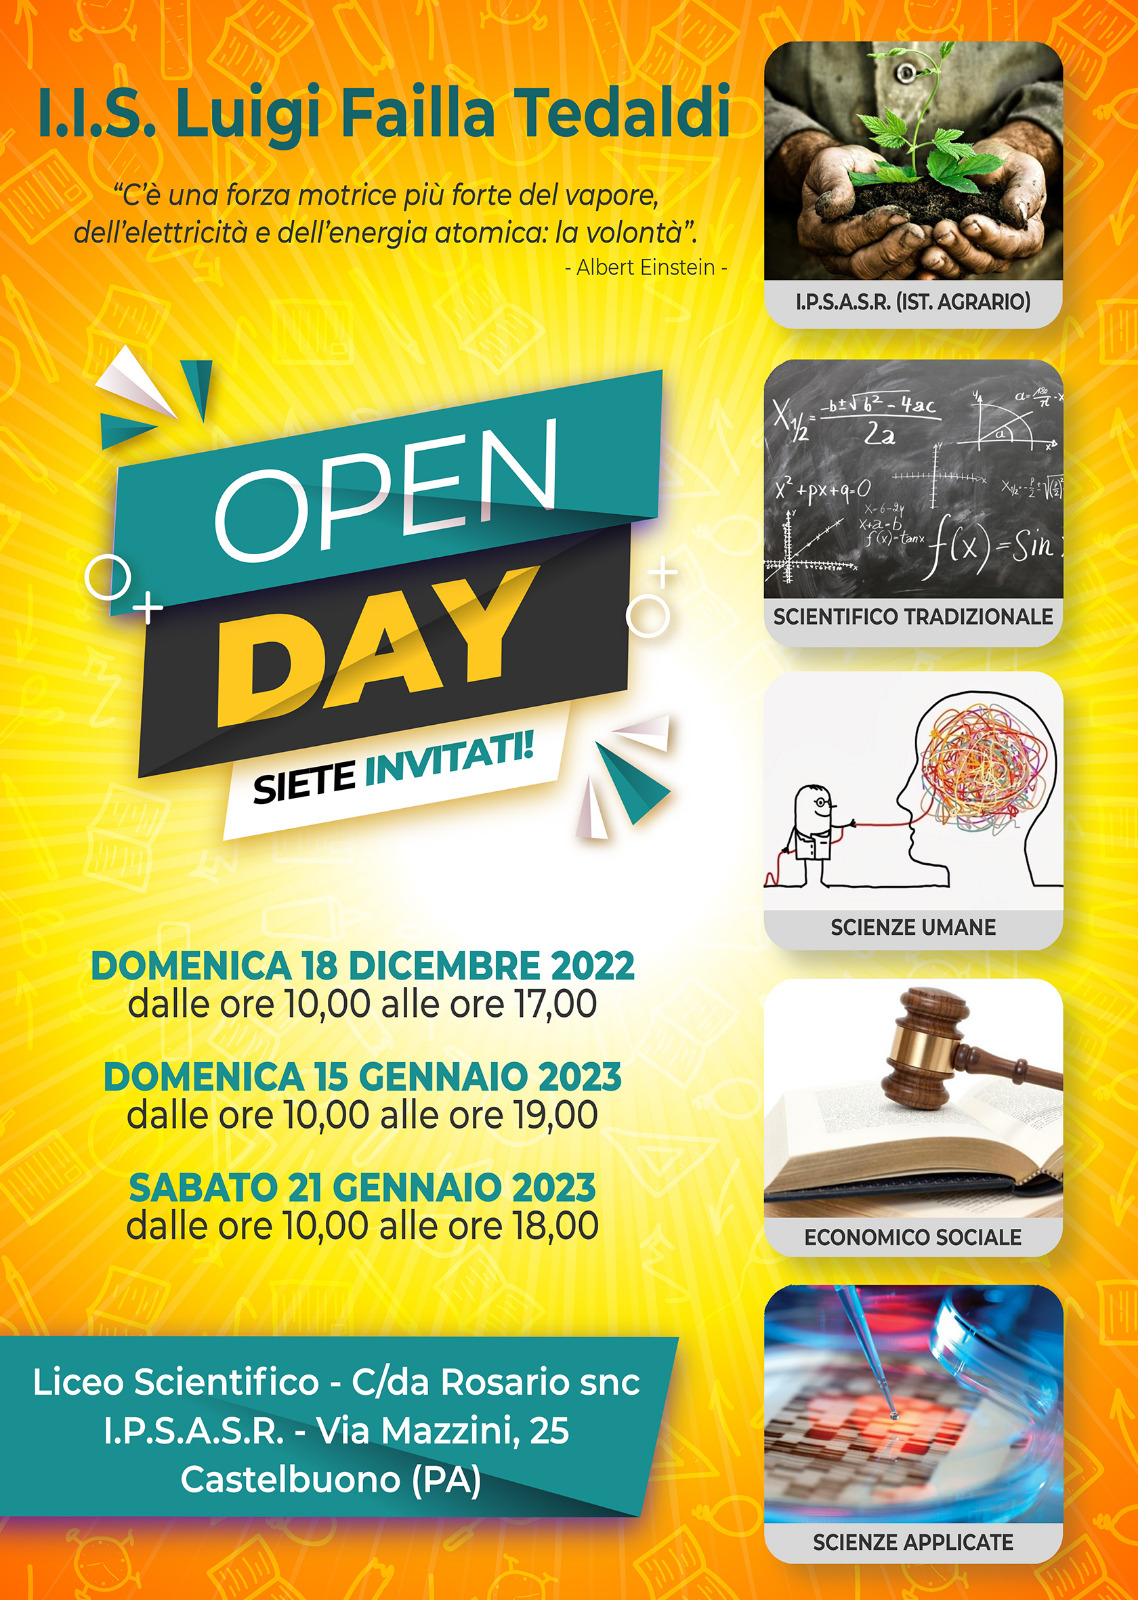 OPEN DAY 2022/23